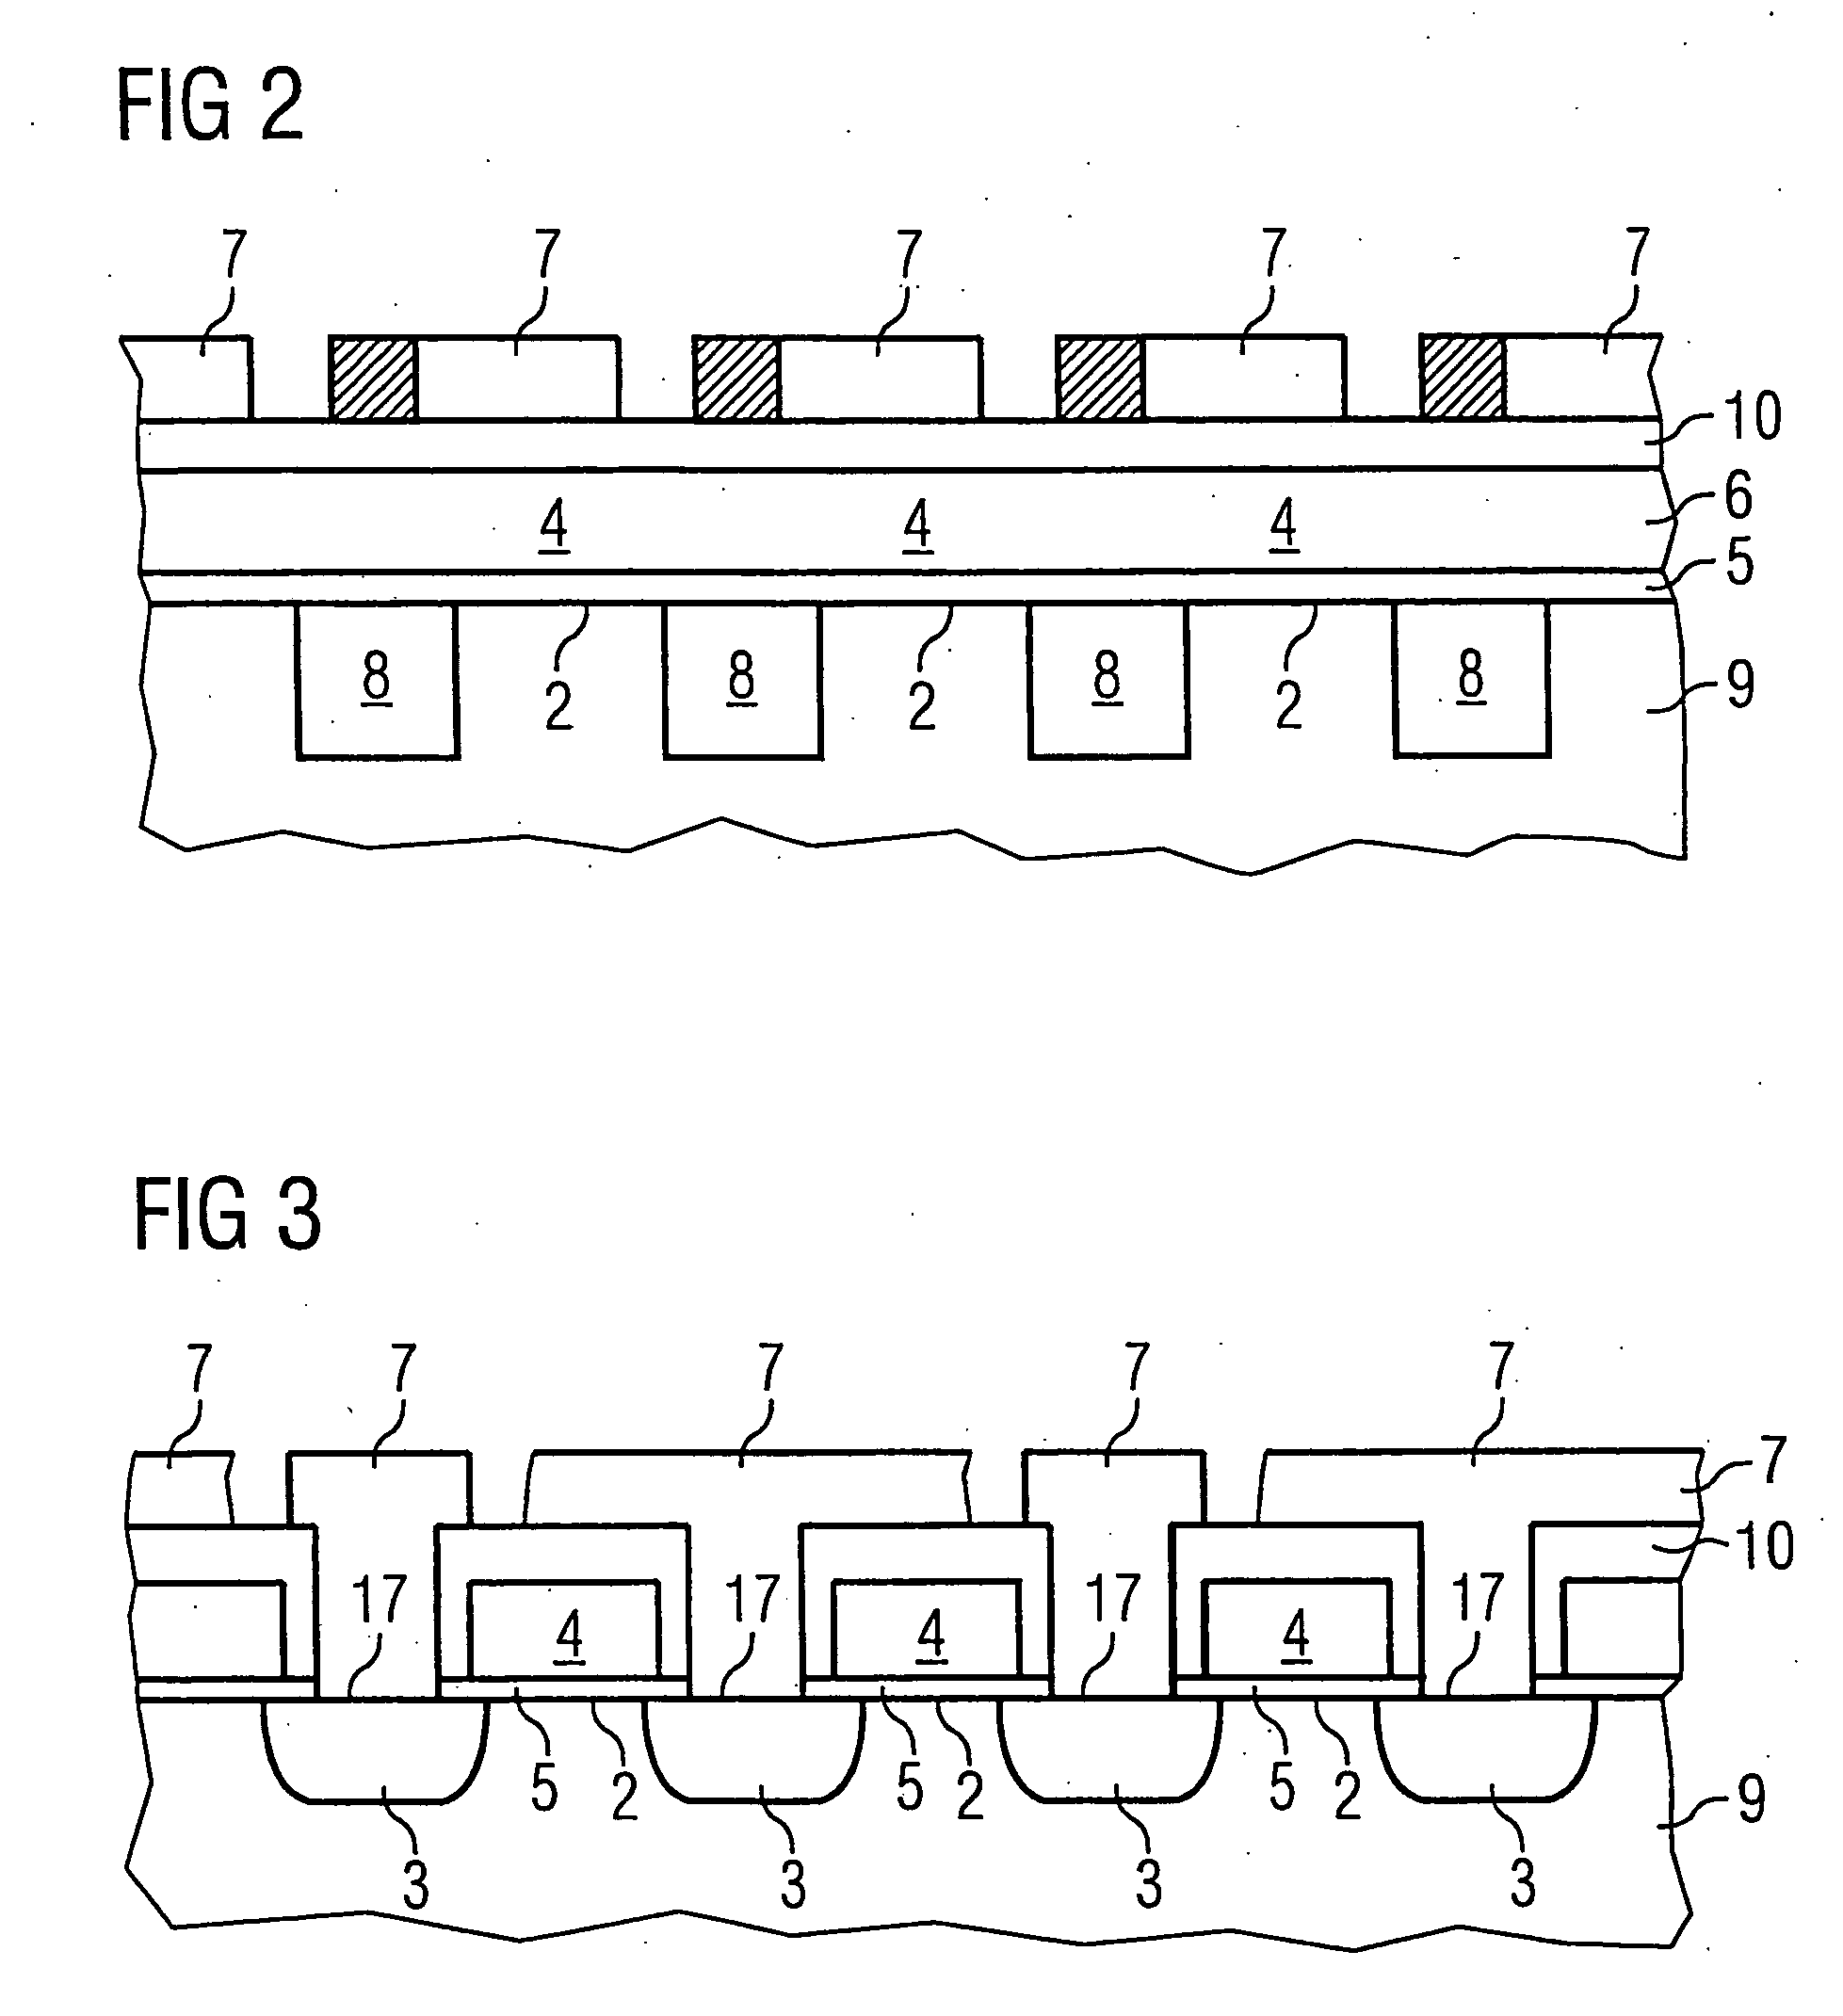 Semiconductor memory with virtual ground architecture